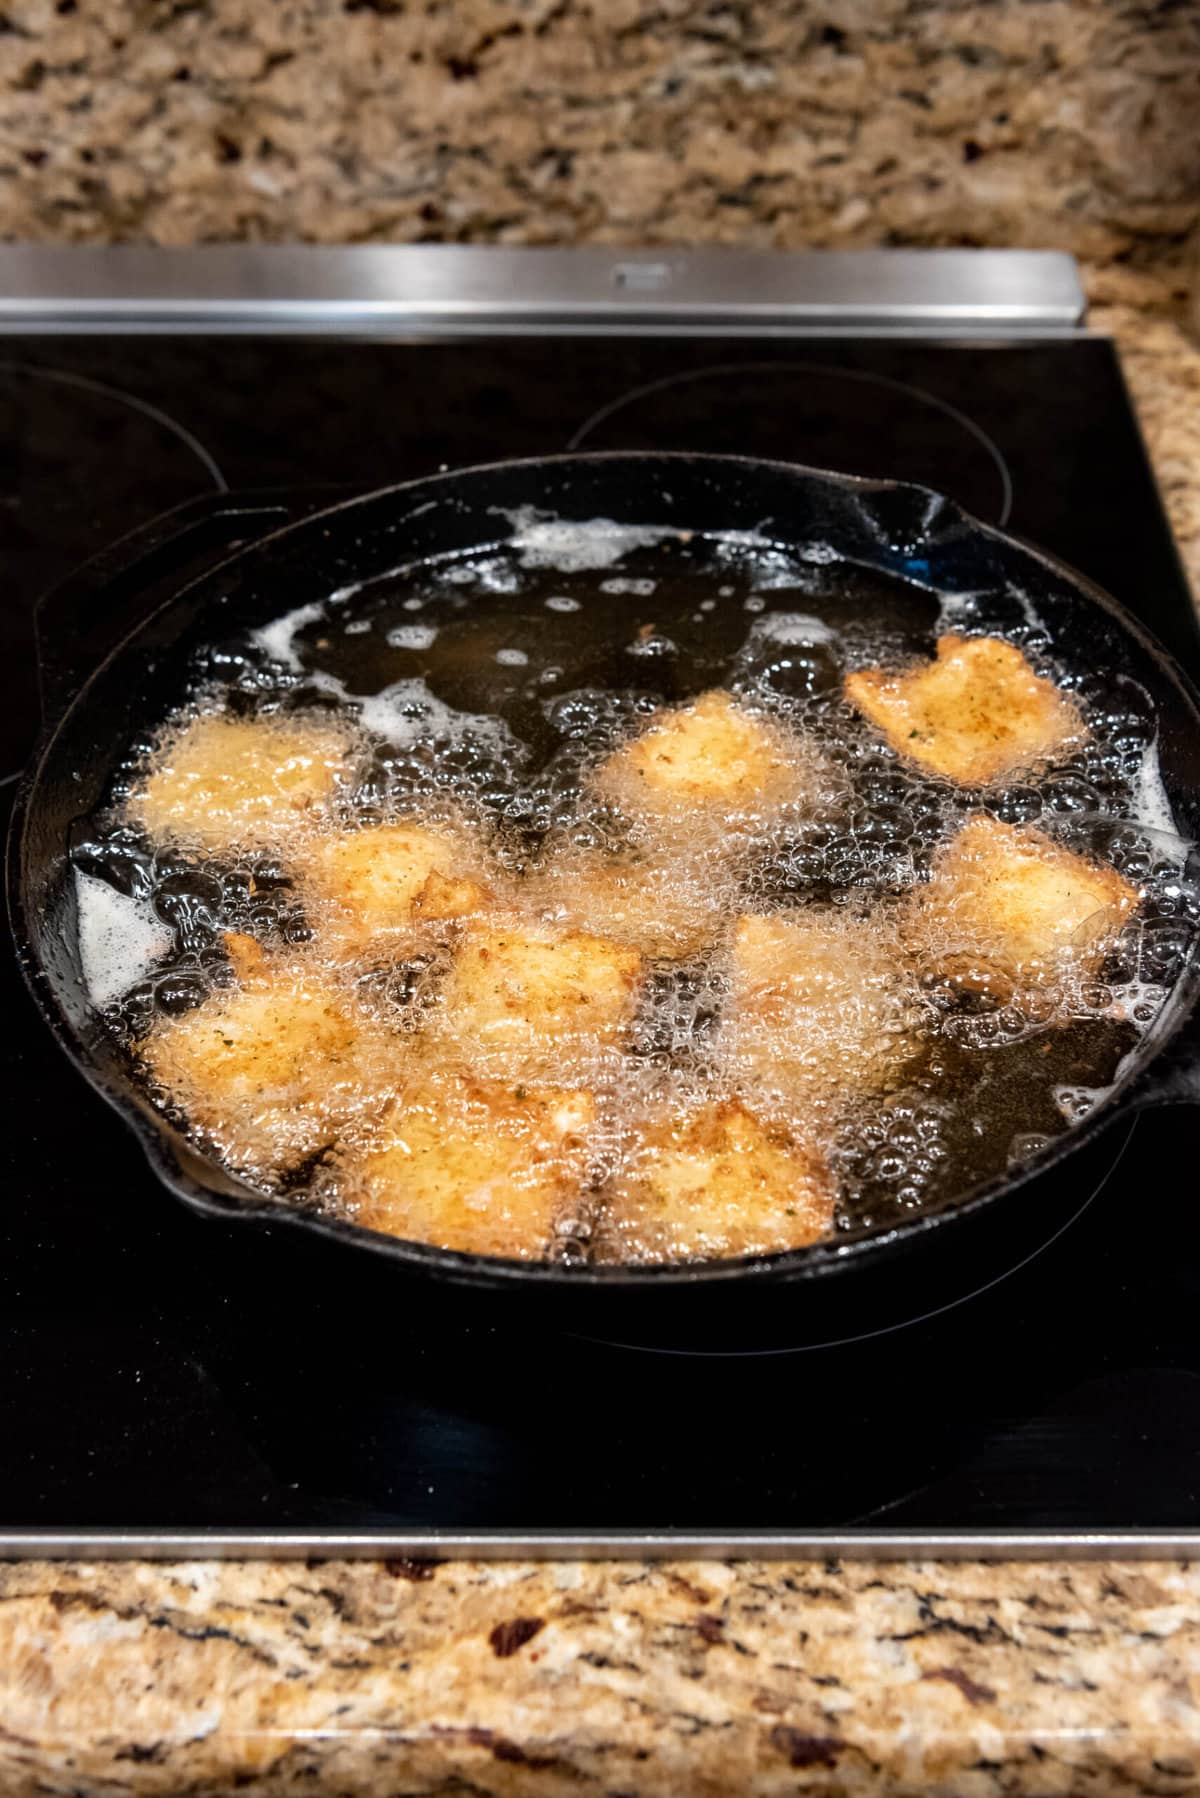 Ravioli being fried in a large skillet filled with hot oil